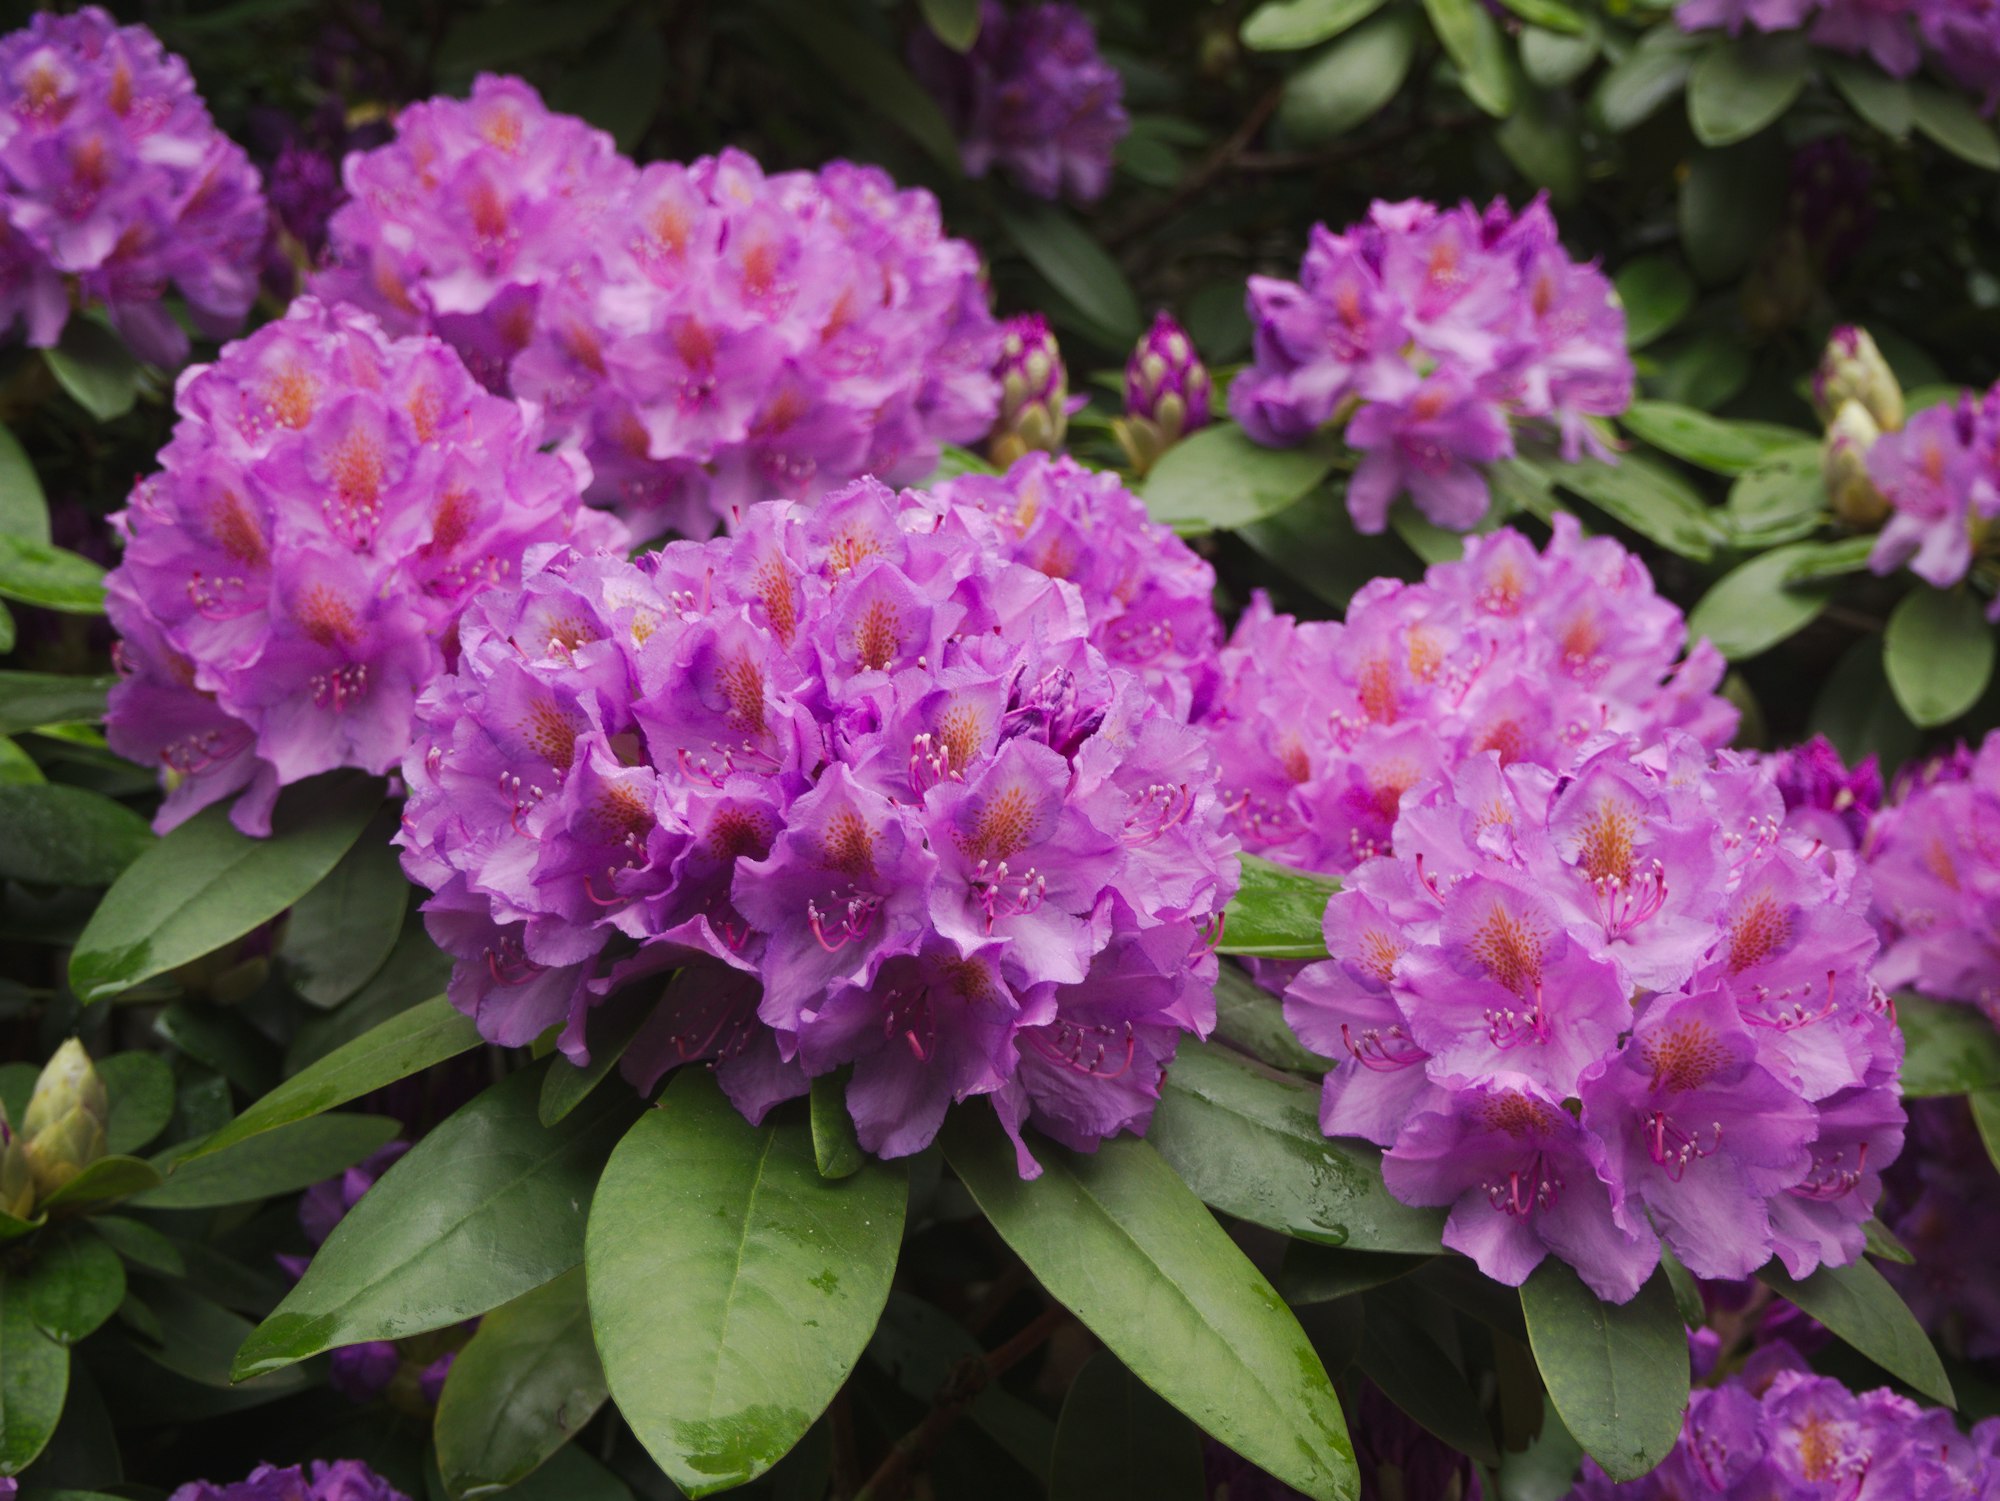 Summer rhododendron flowers